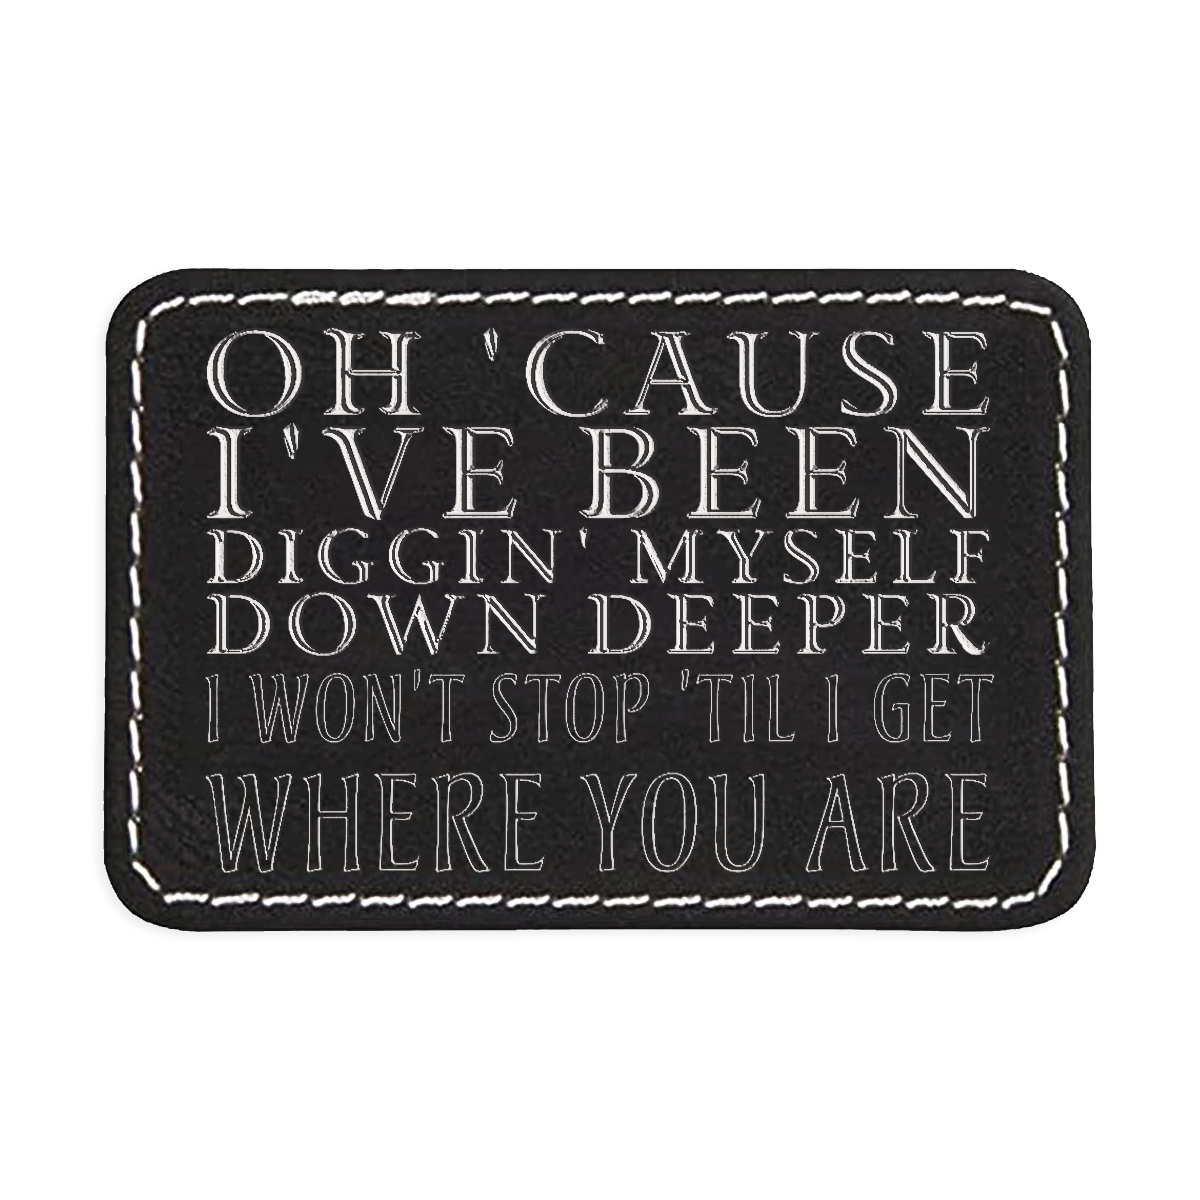 Digging Myself Down Deeper Engraved Patch